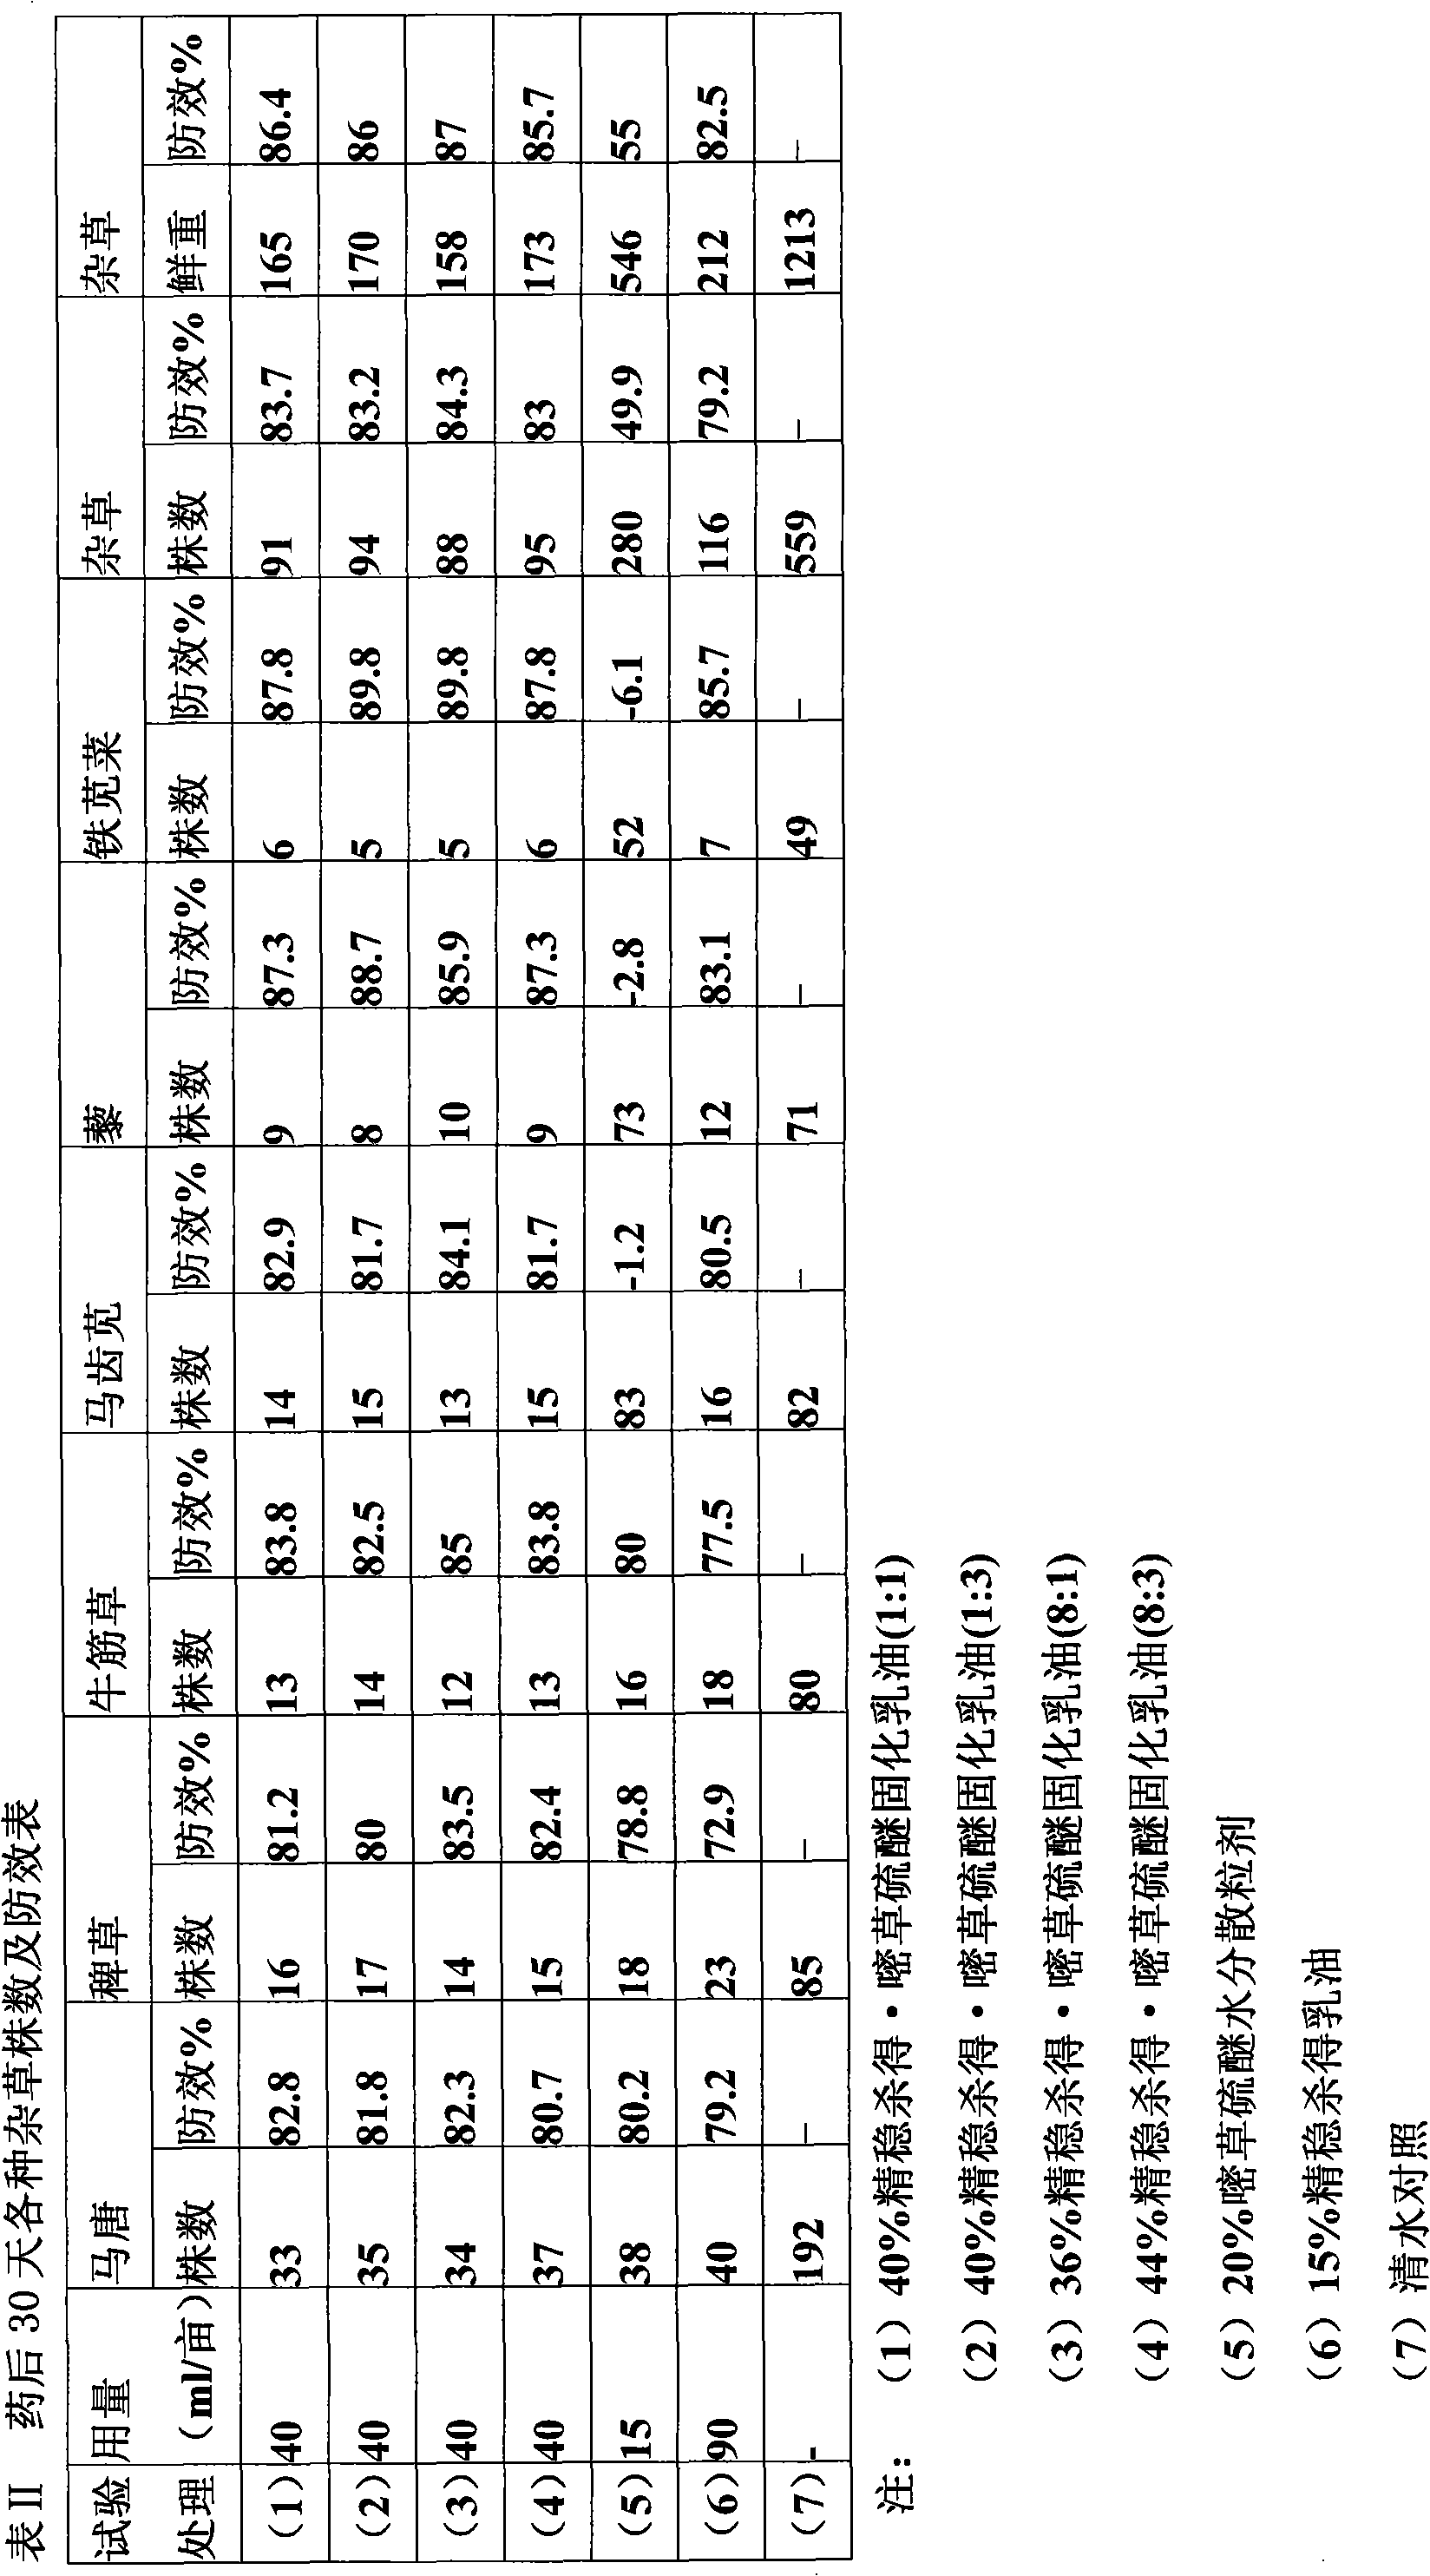 Herbicide composition containing fluazifop-p-butyl and pyrithiobac-sodium